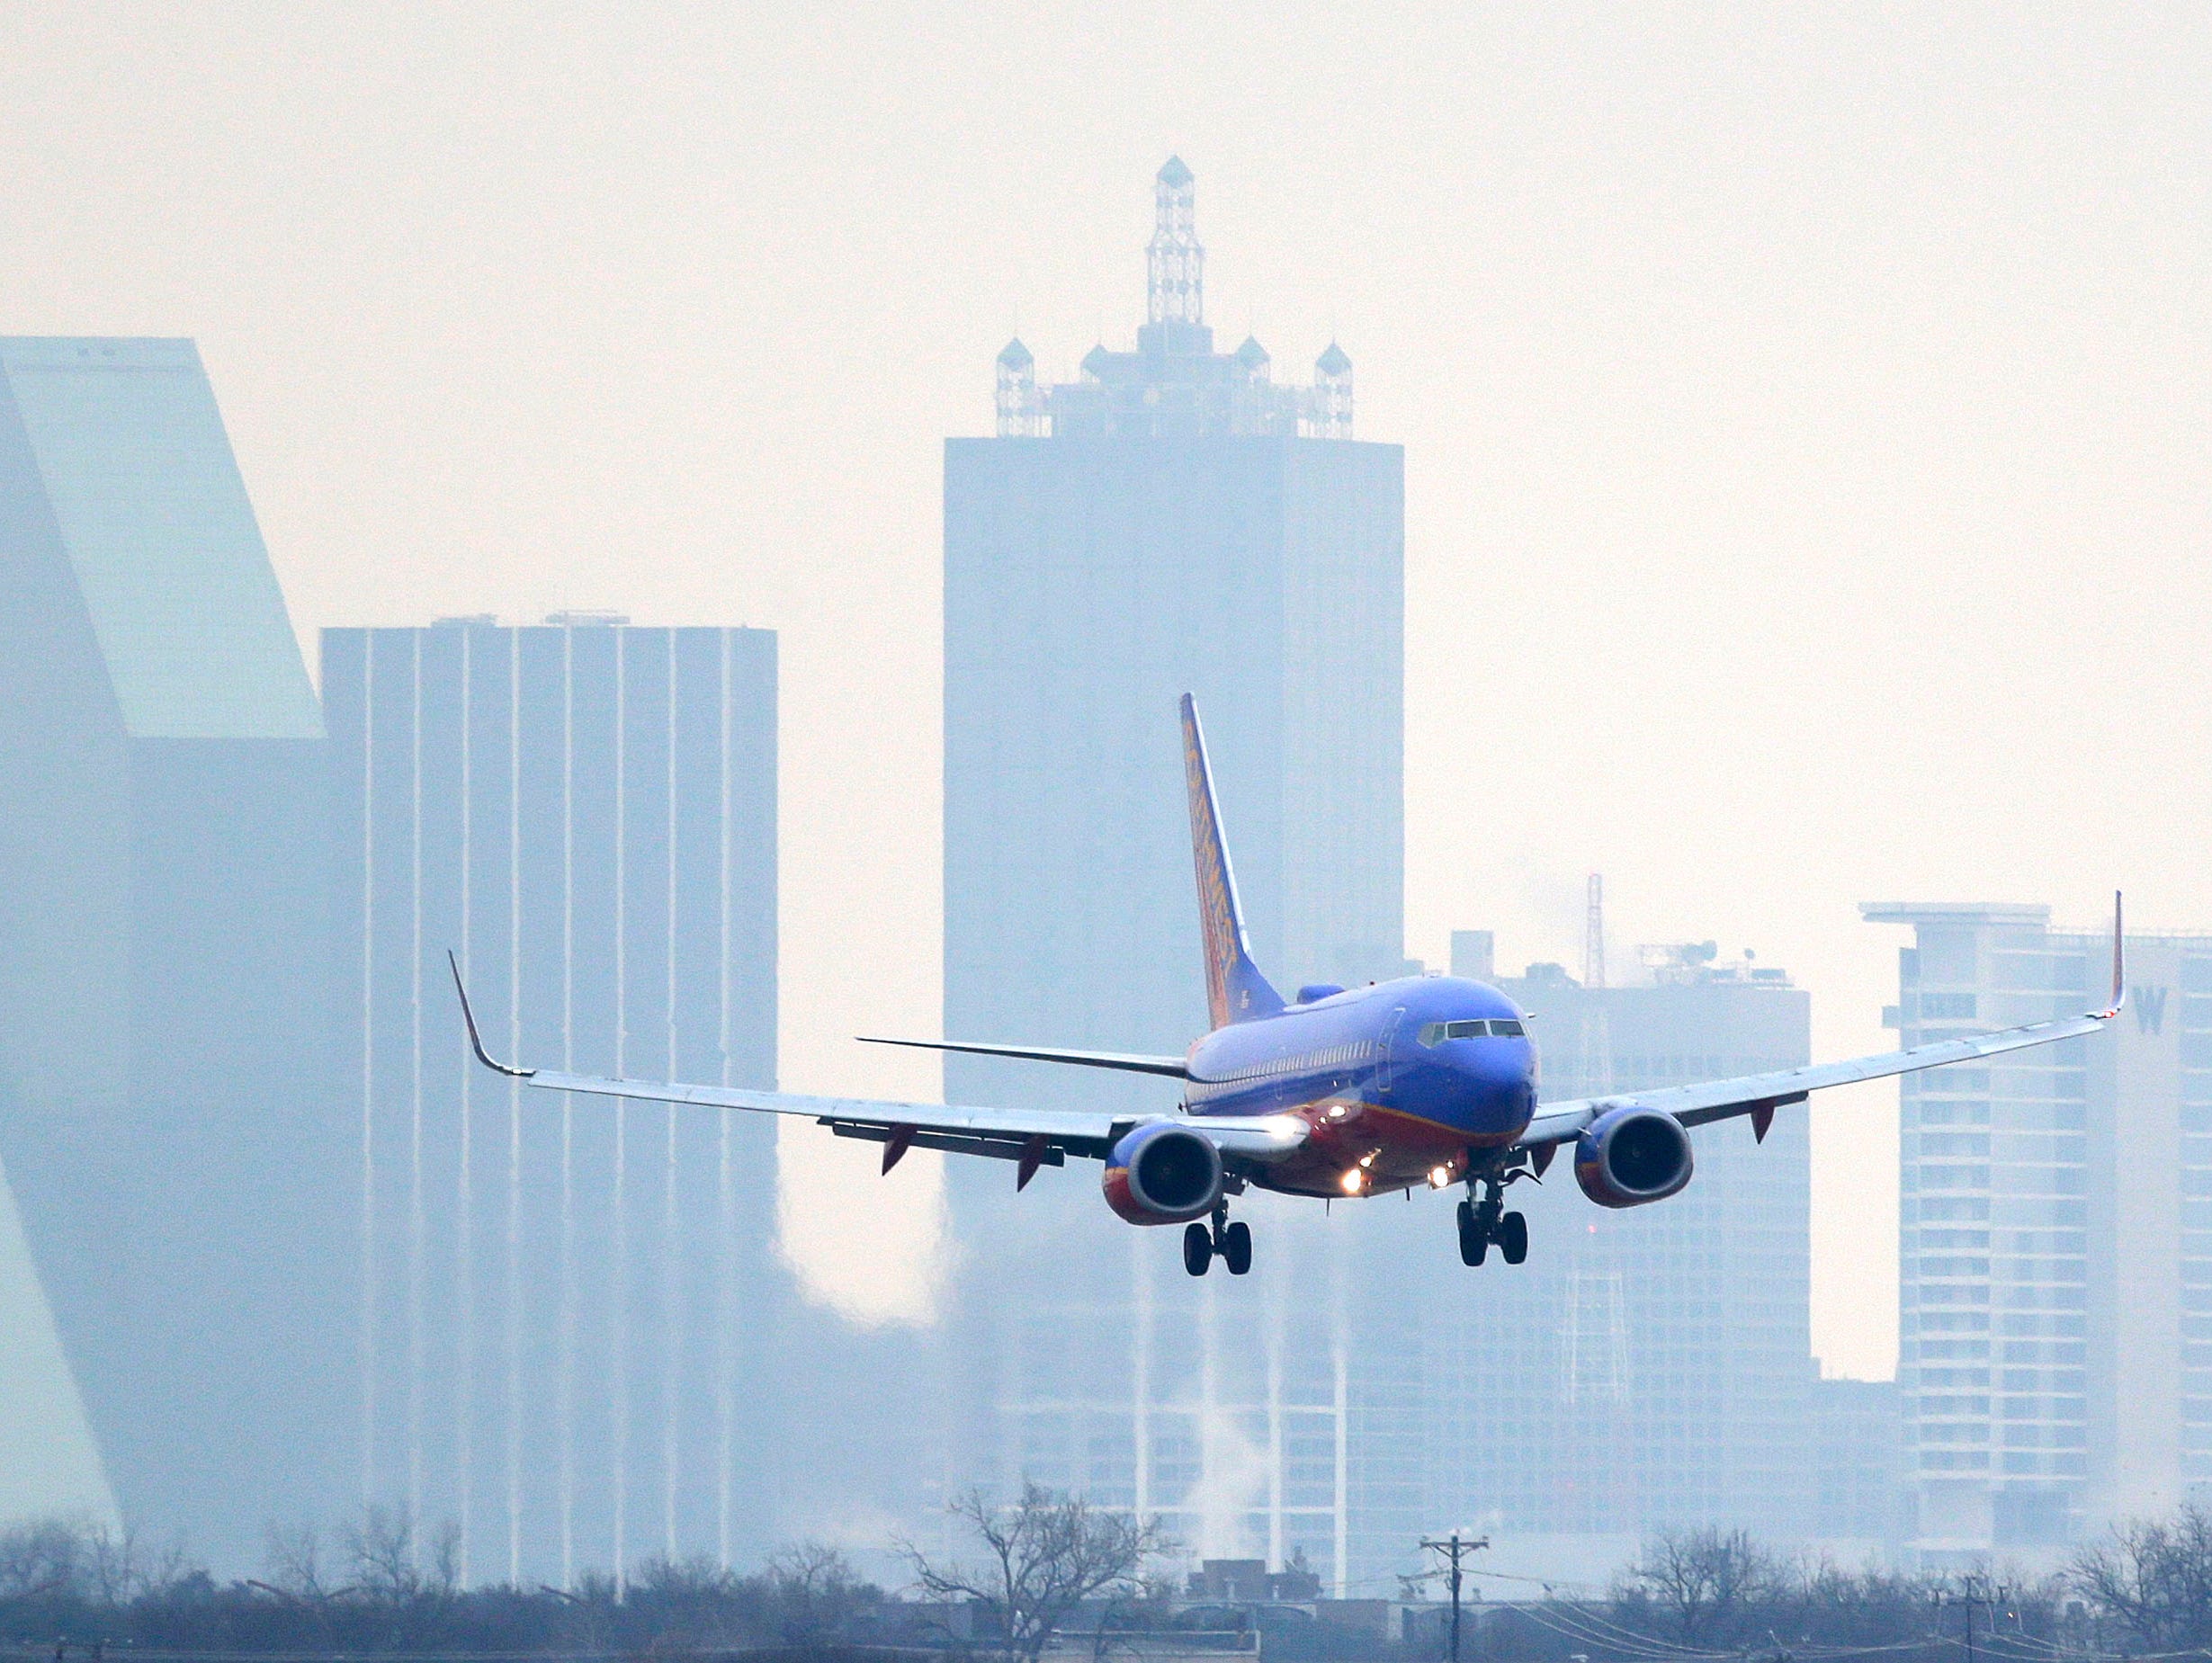 A Southwest Airlines jet lands at Love Field in Dallas on Feb. 3, 2014.